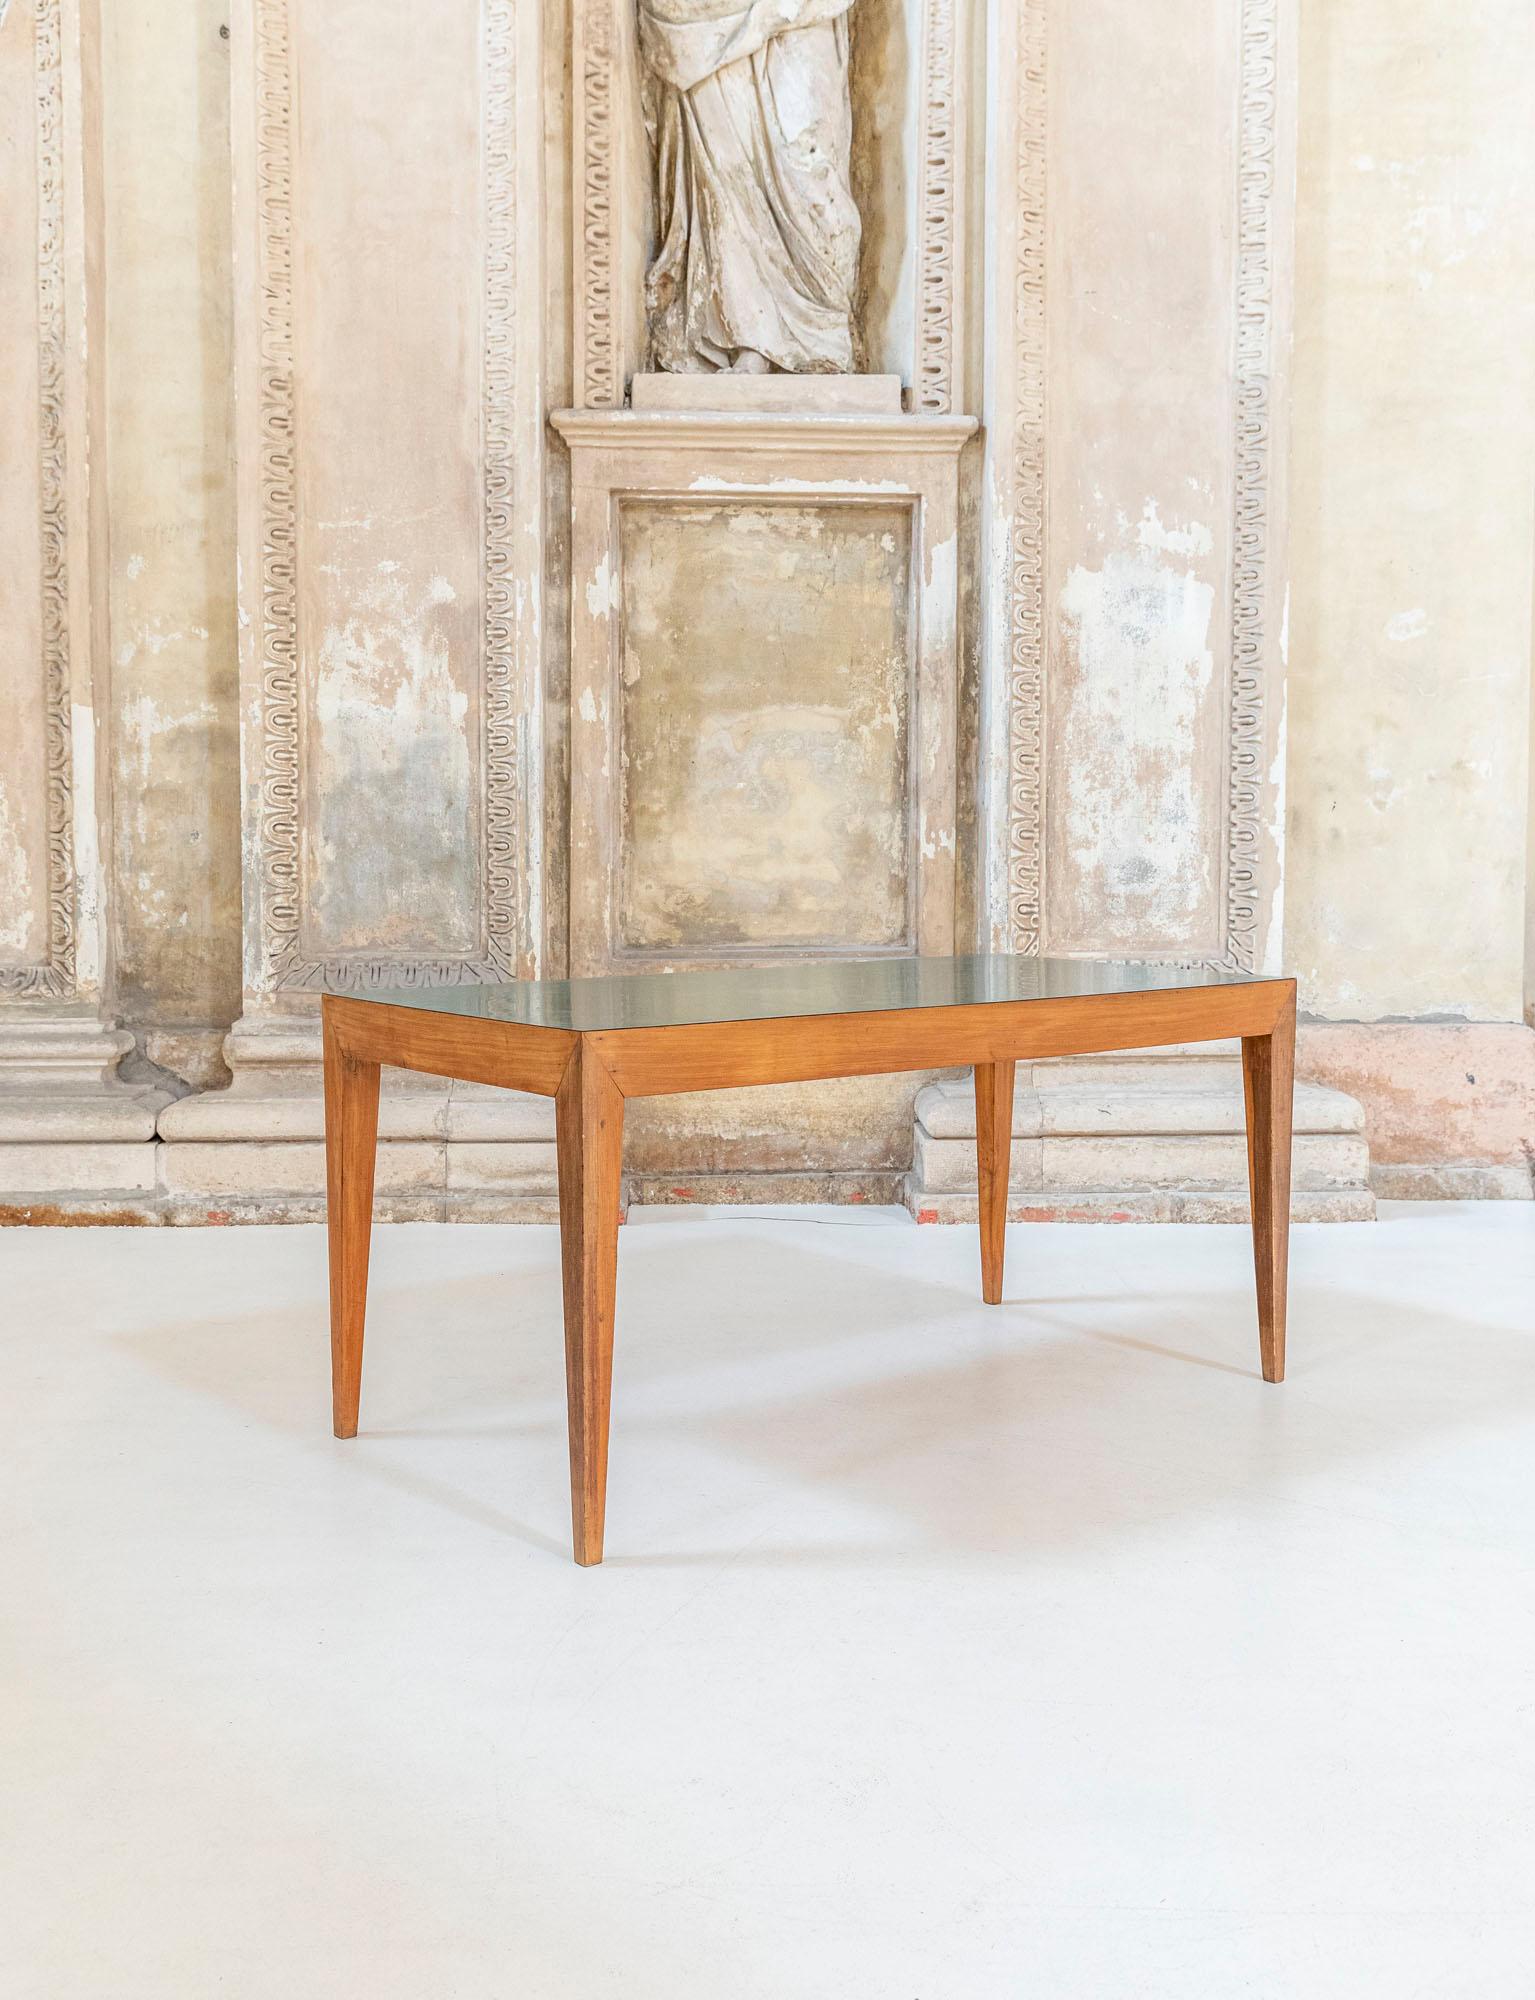 Table attributed to Carlo Scarpa for University Ca' Foscari in Venice.
Original green laminated top and elegant shaped legs.